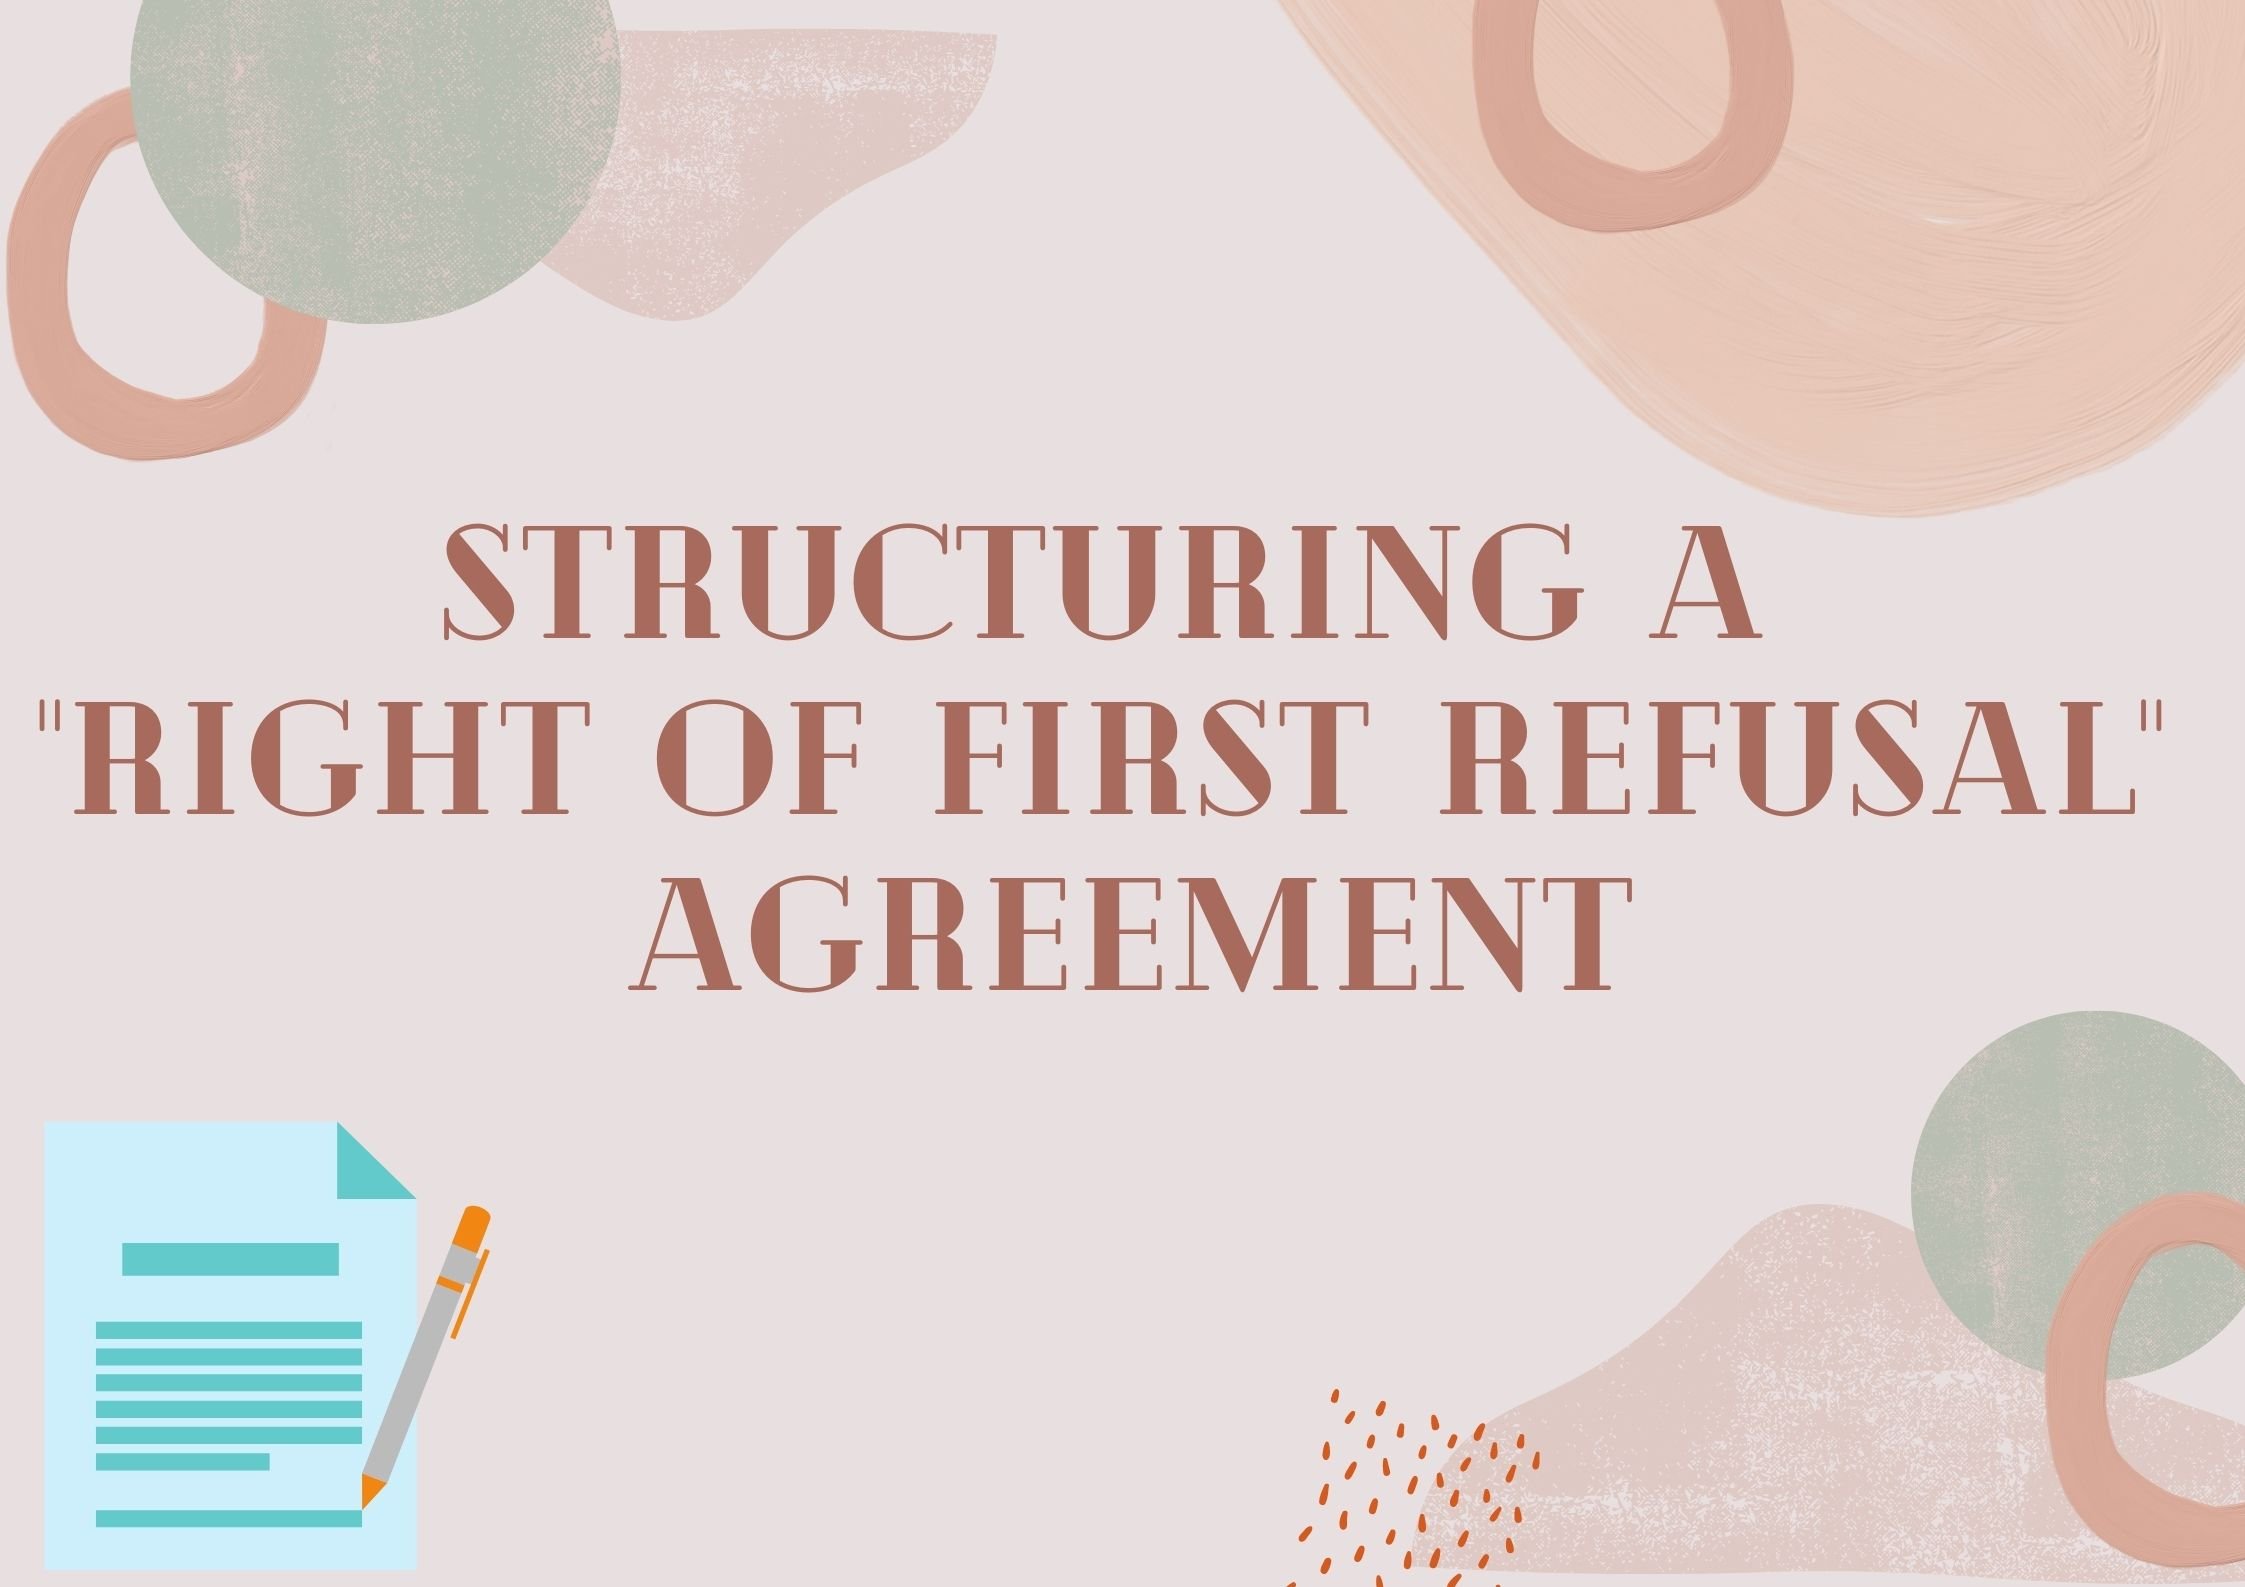 STRUCTURING A "RIGHT OF FIRST REFUSAL" AGREEMENT